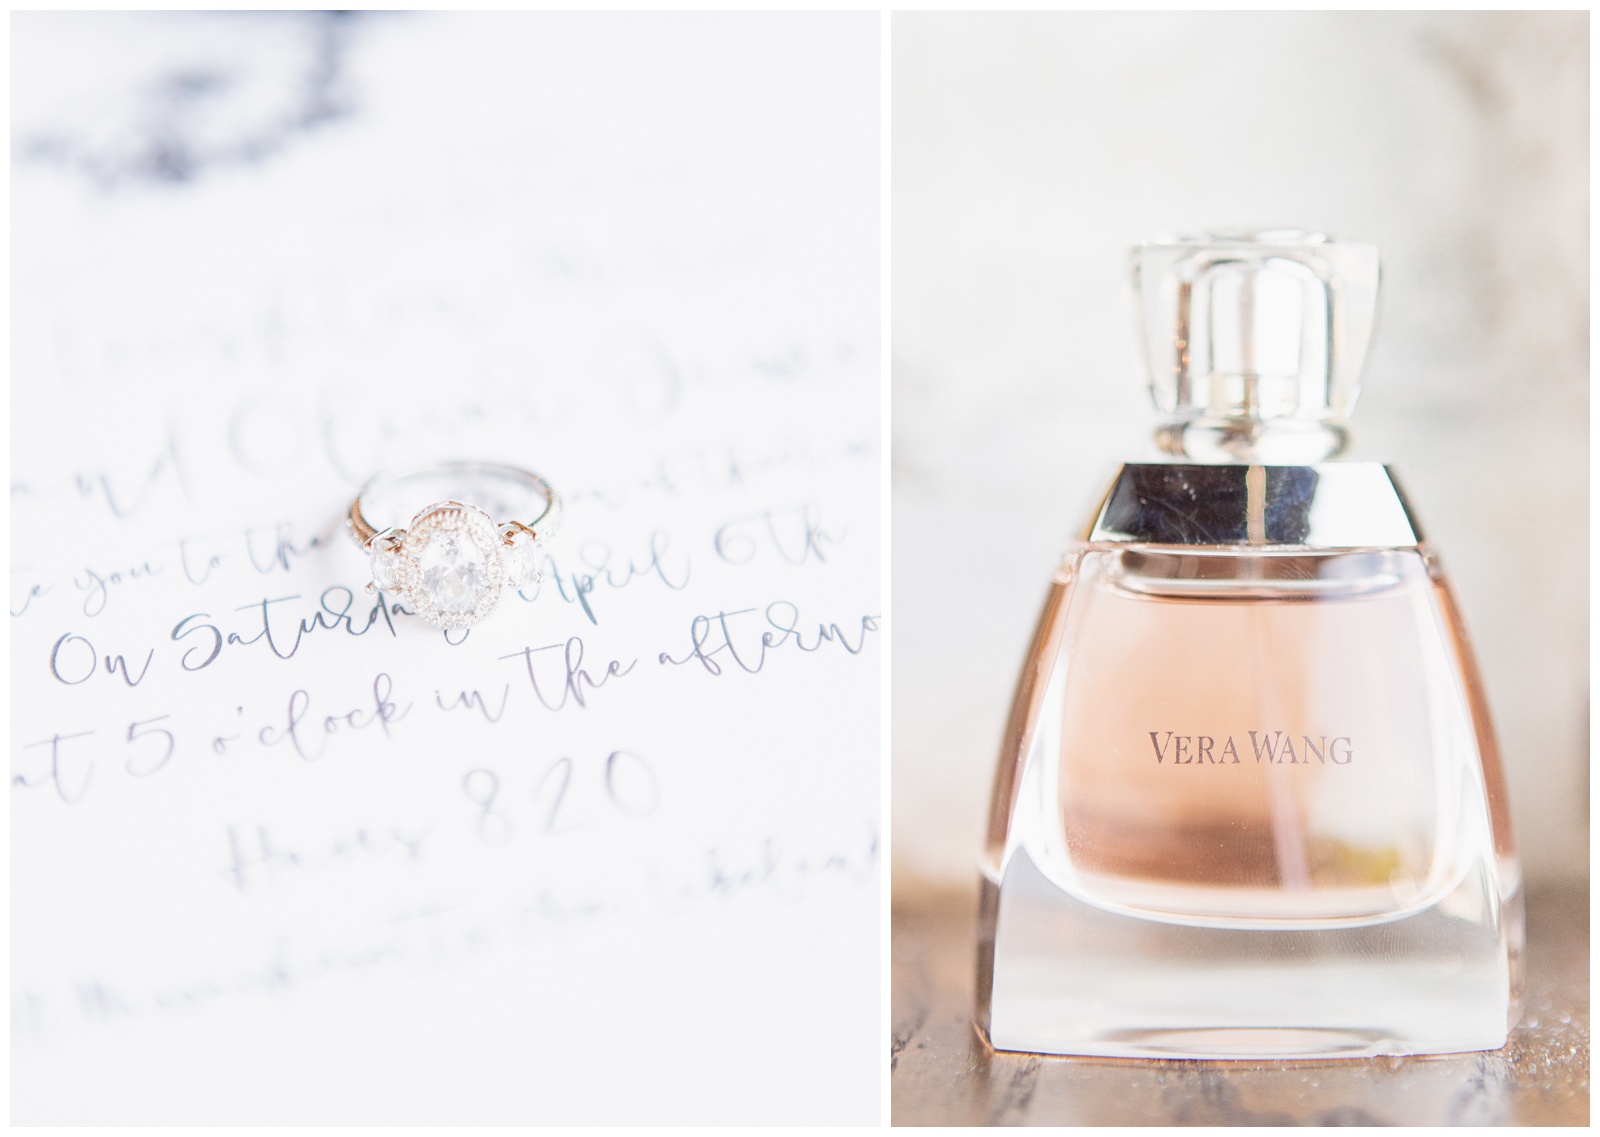 Why we edit light and airy vs dark and moody - ring on invitation and designer perfume